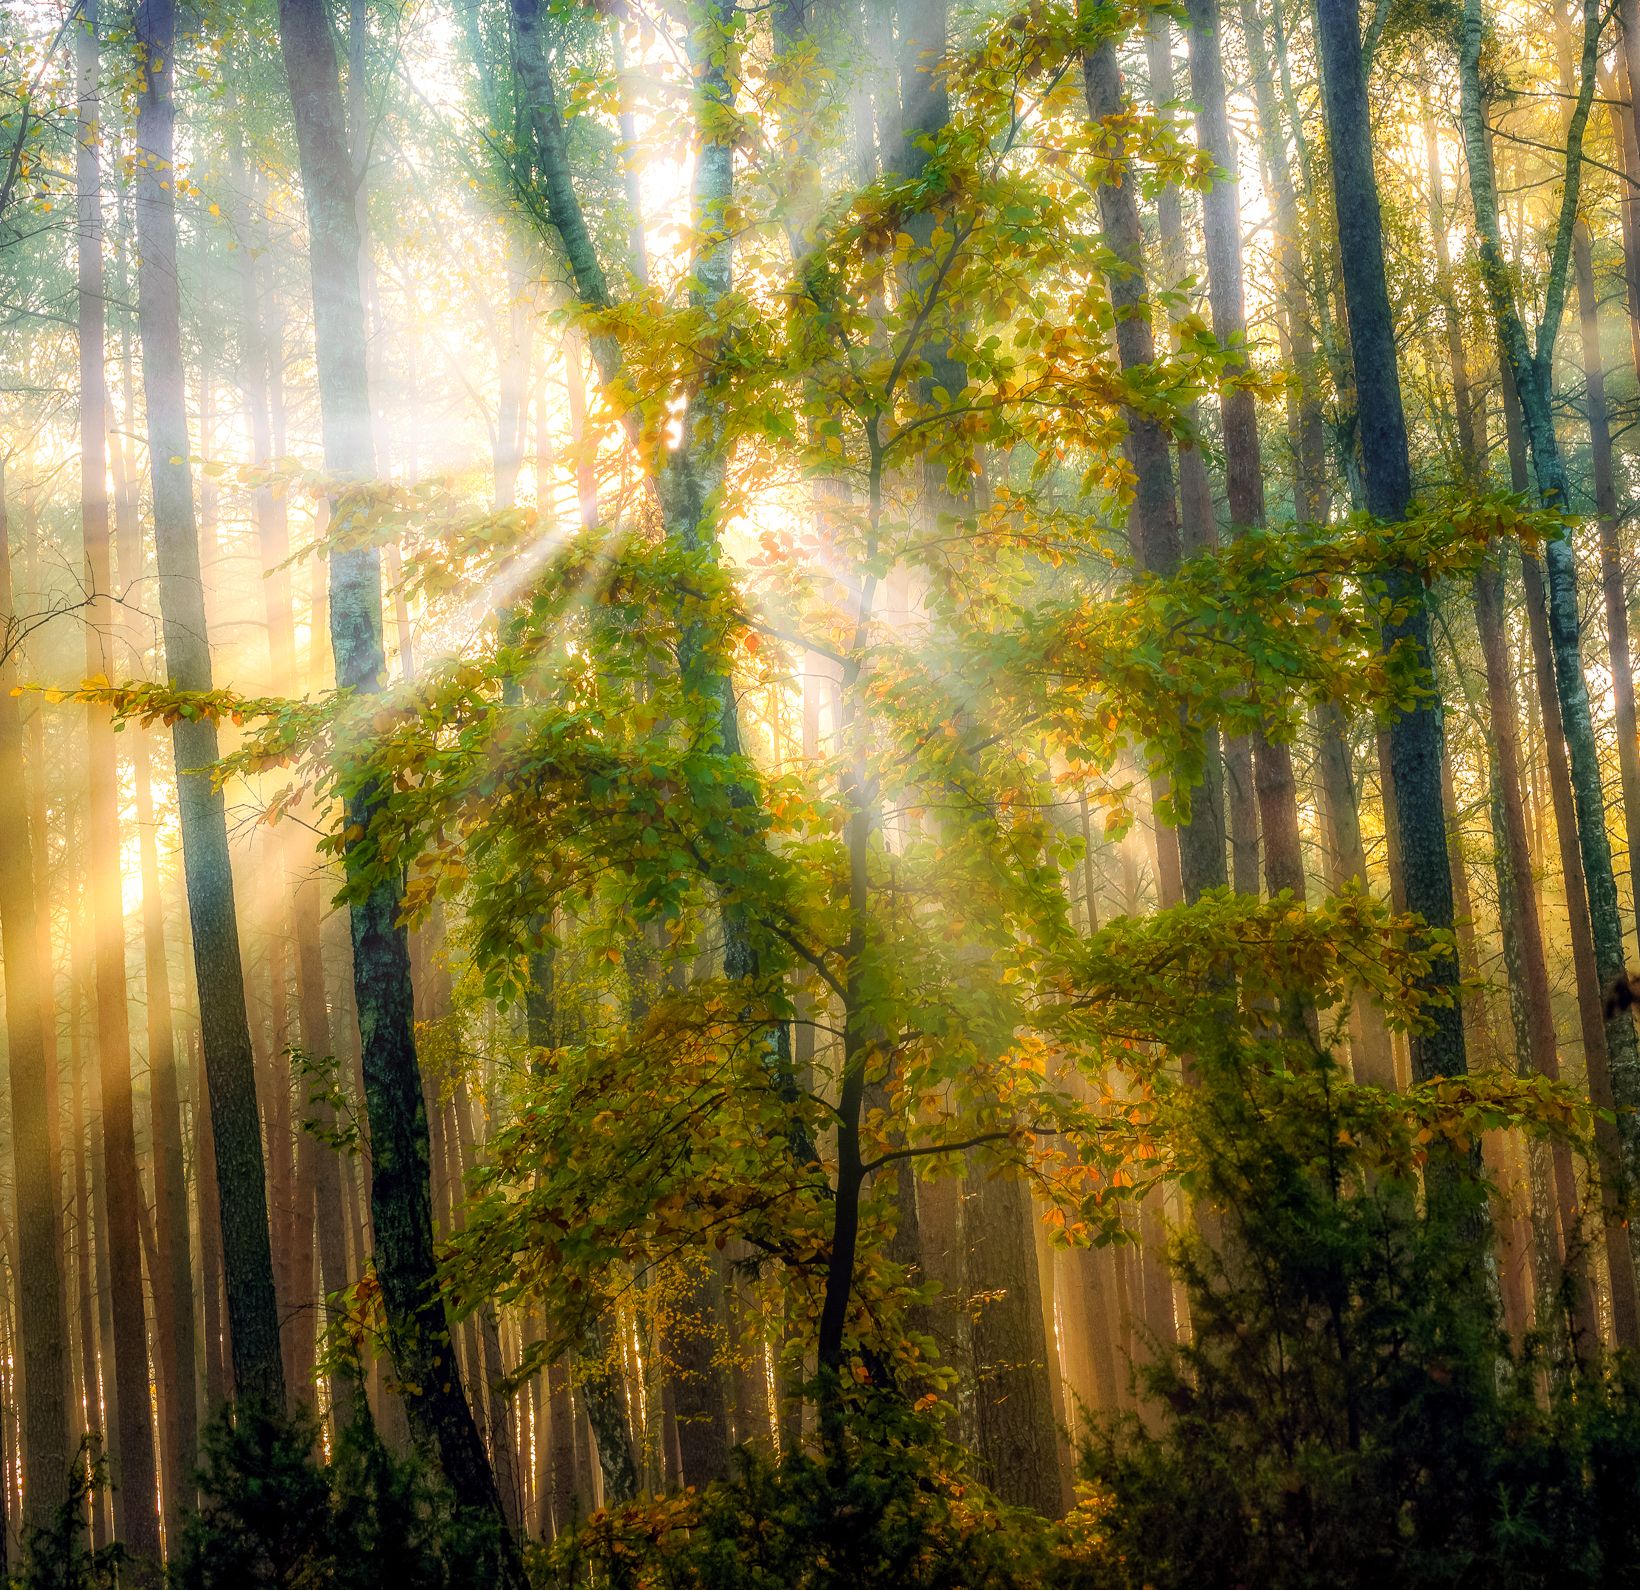 nature  autumn 2021  forest  trees  fog  sunbeams  morning  forest atmosphere  sun  light  Outdoors  Beauty In Nature  Scenics - Nature  Photography, Krzysztof Tollas